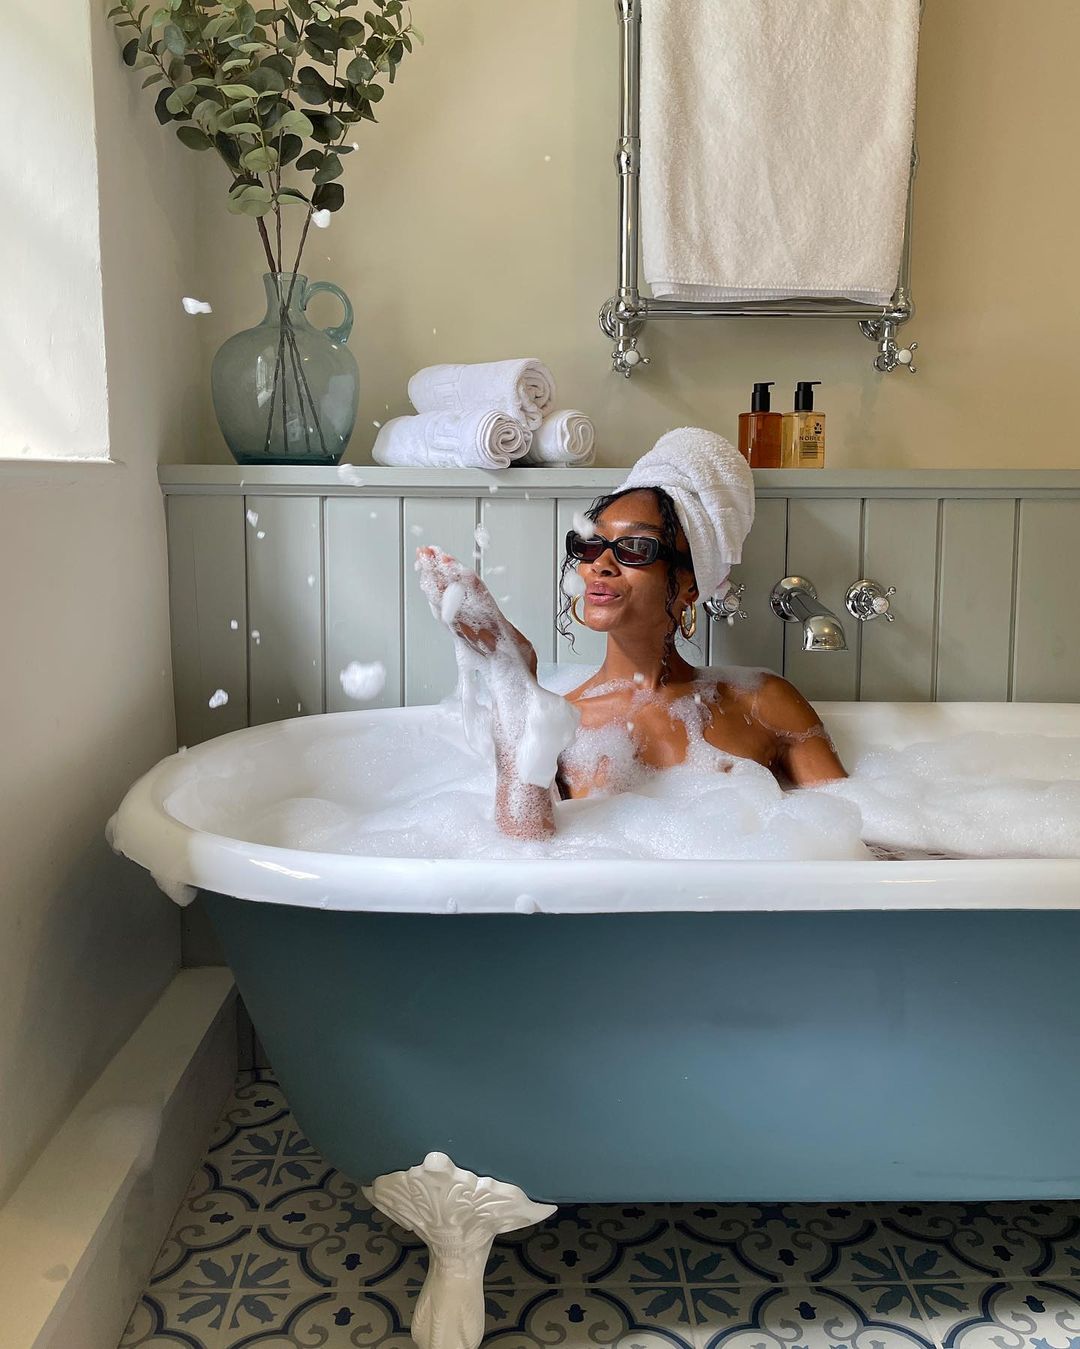 Best & other Stories bath and body products: Woman in clawfoot bathtub with bubble bath